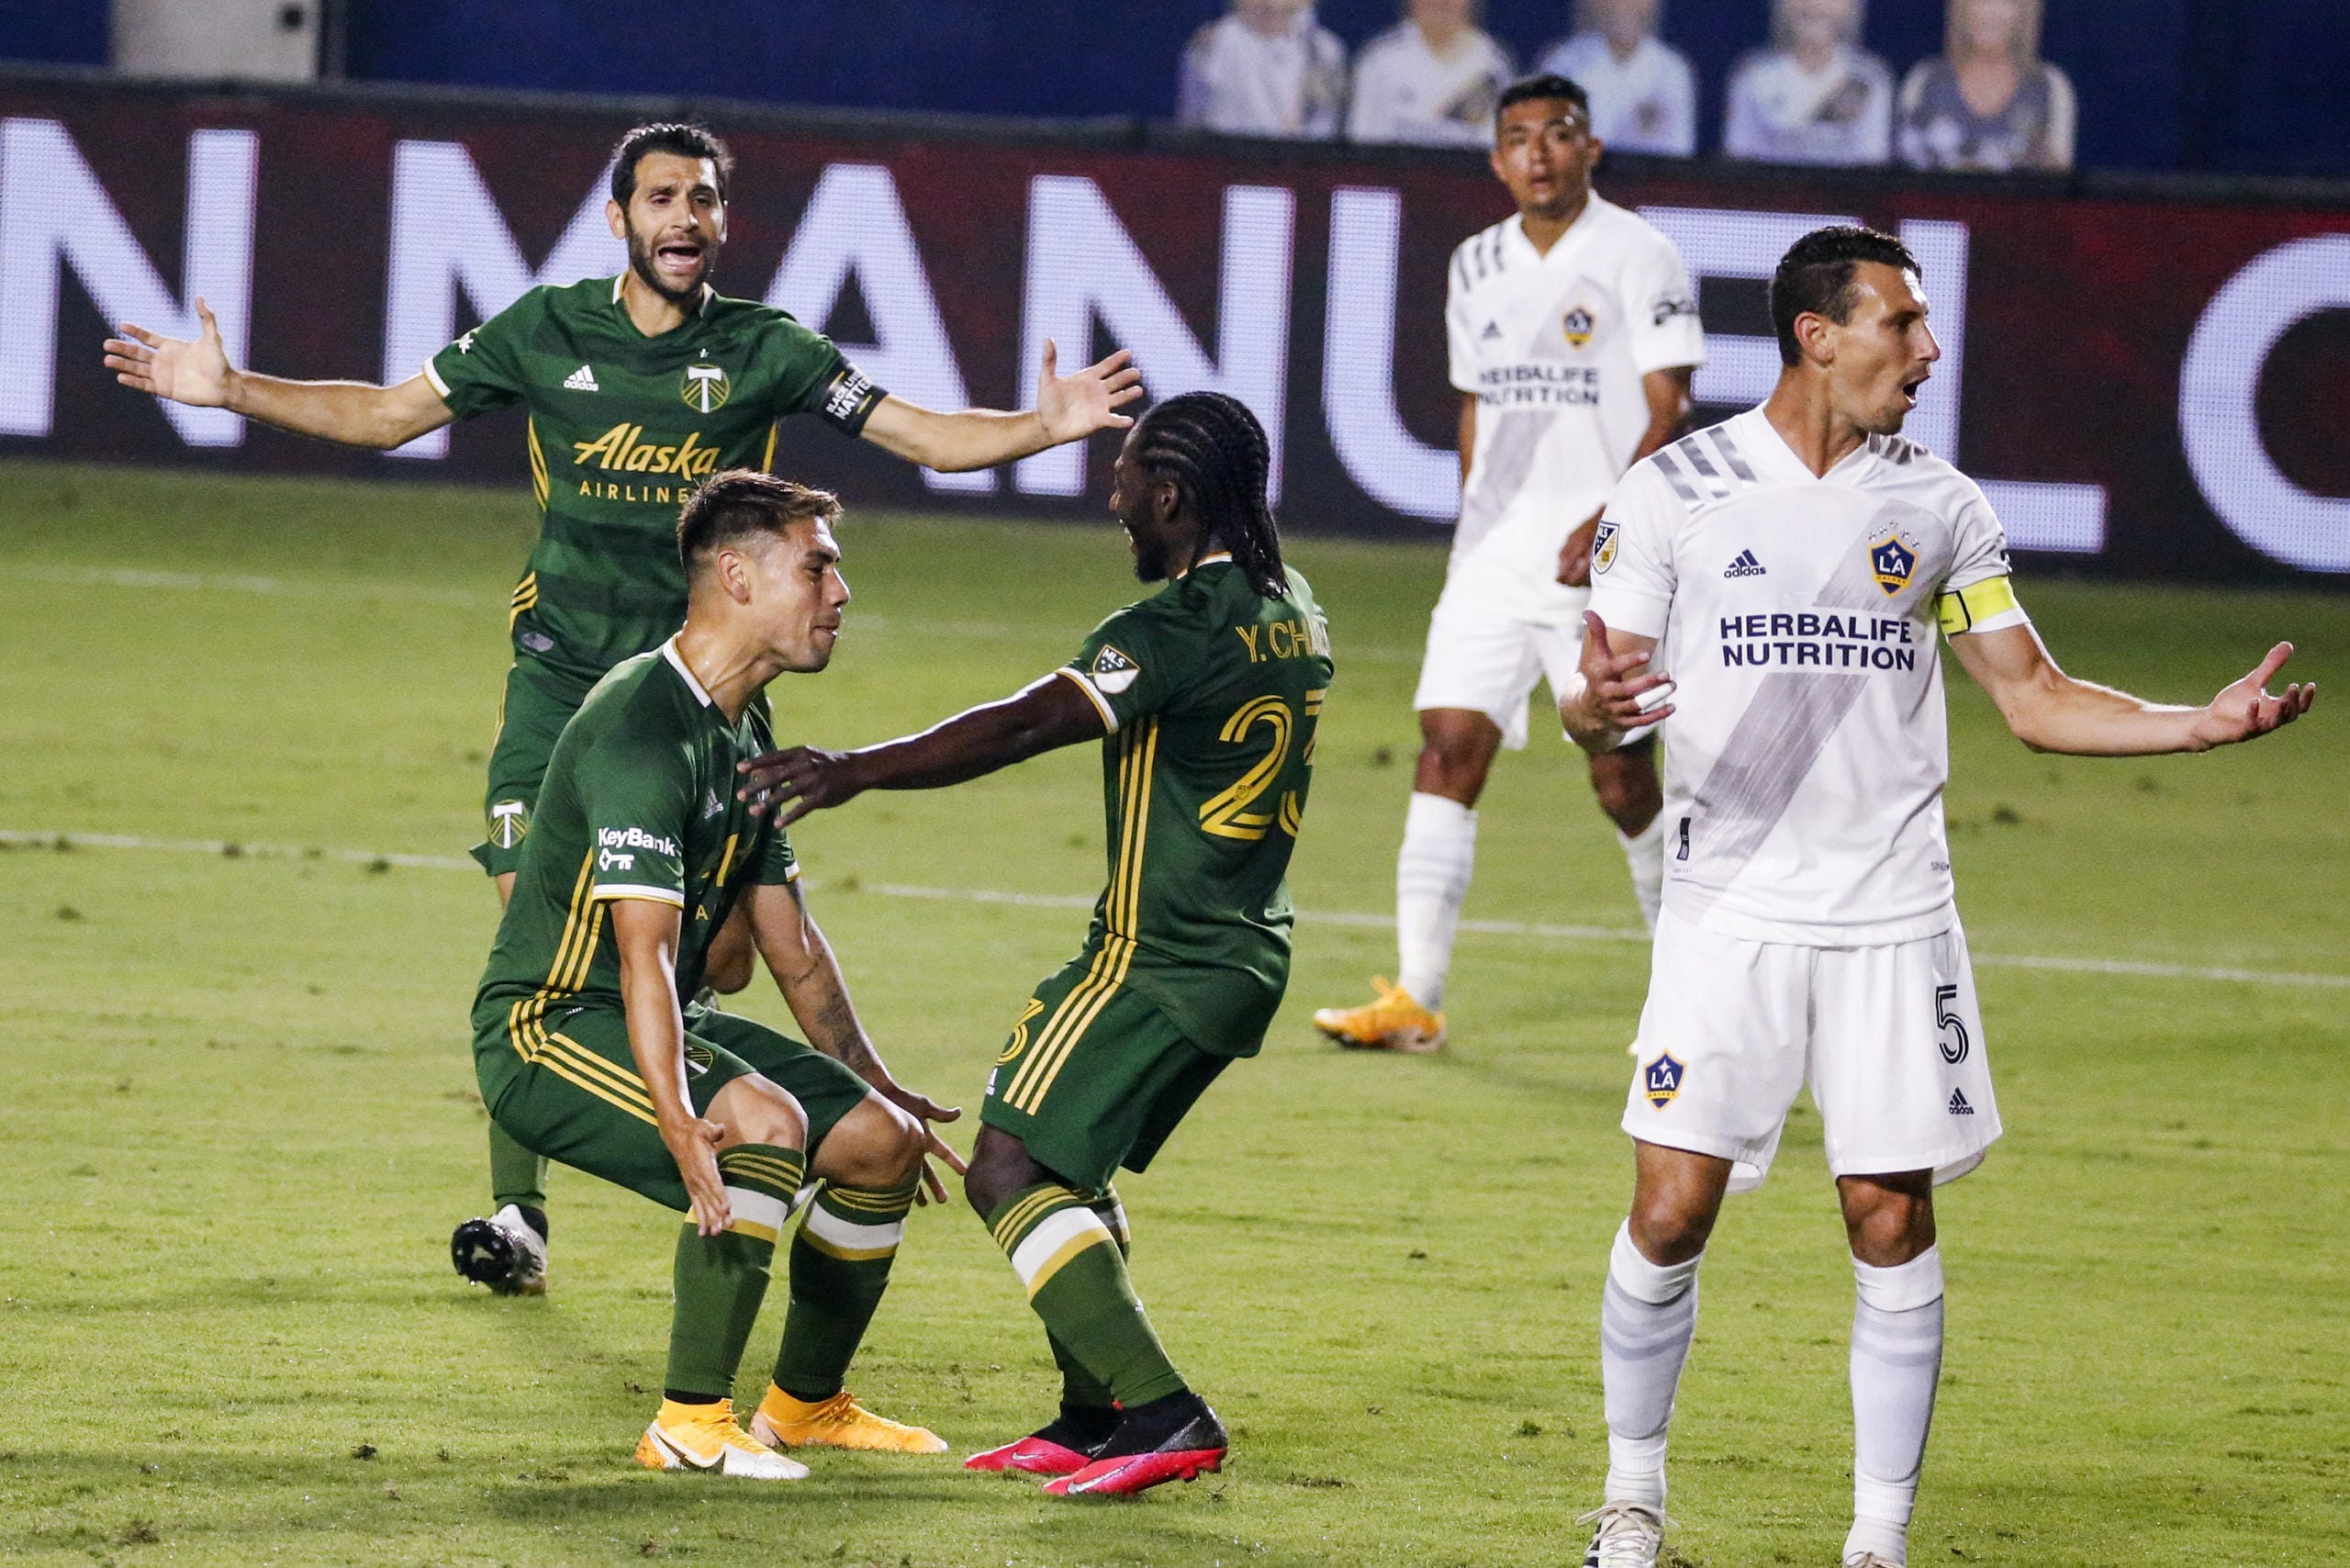 Portland Timbers forward Felipe Mora, front left, celebrates with midfielder Yimmi Chara, center, after scoring a goal against the LA Galaxy during the first half of an MLS soccer match in Carson, Calif., Wednesday, Oct. 7, 2020. (AP Photo/Ringo H.W.